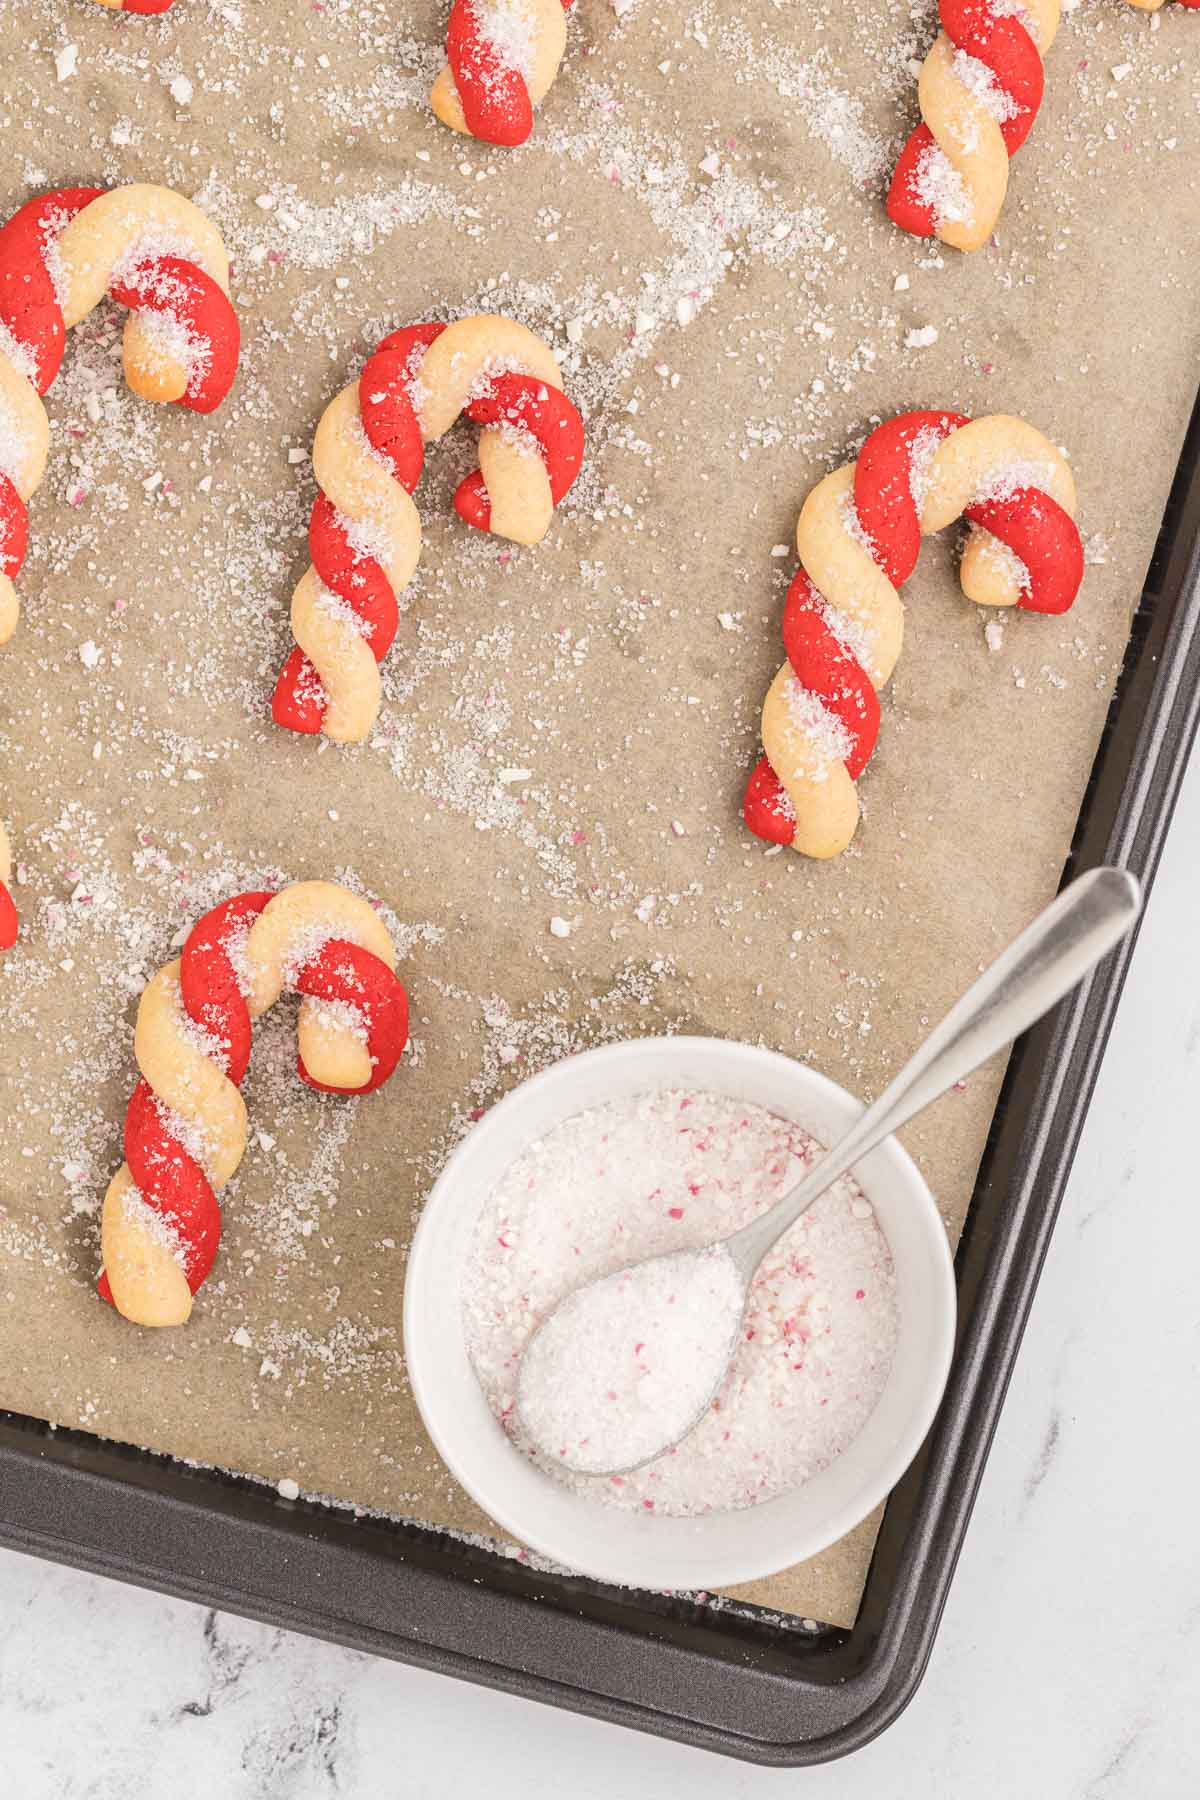 Candy cane cookies on a baking sheet.